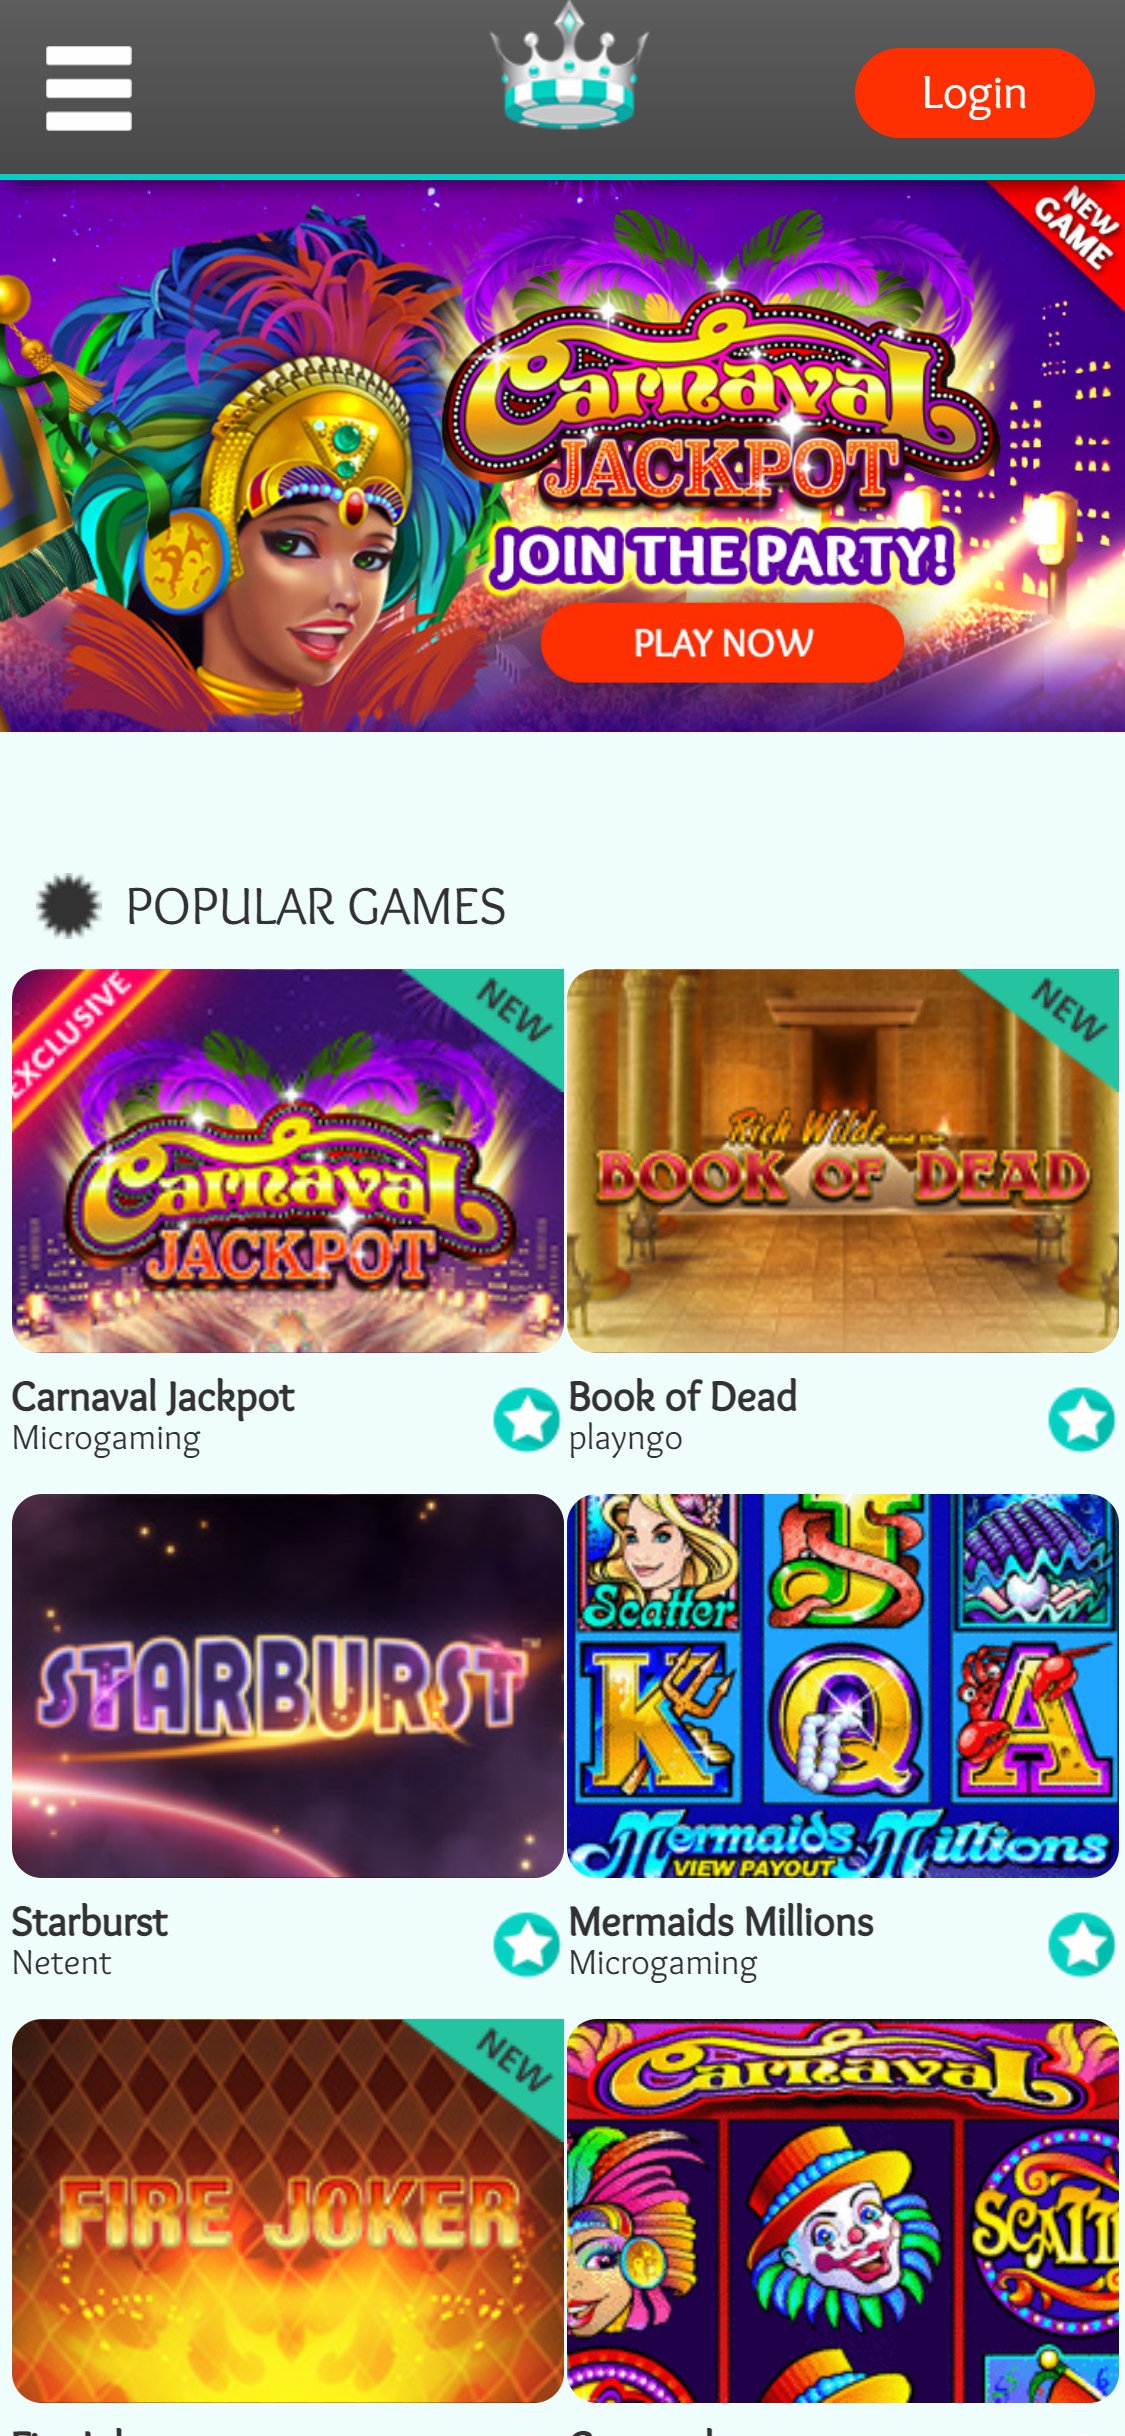 My Jackpot Casino Mobile Review